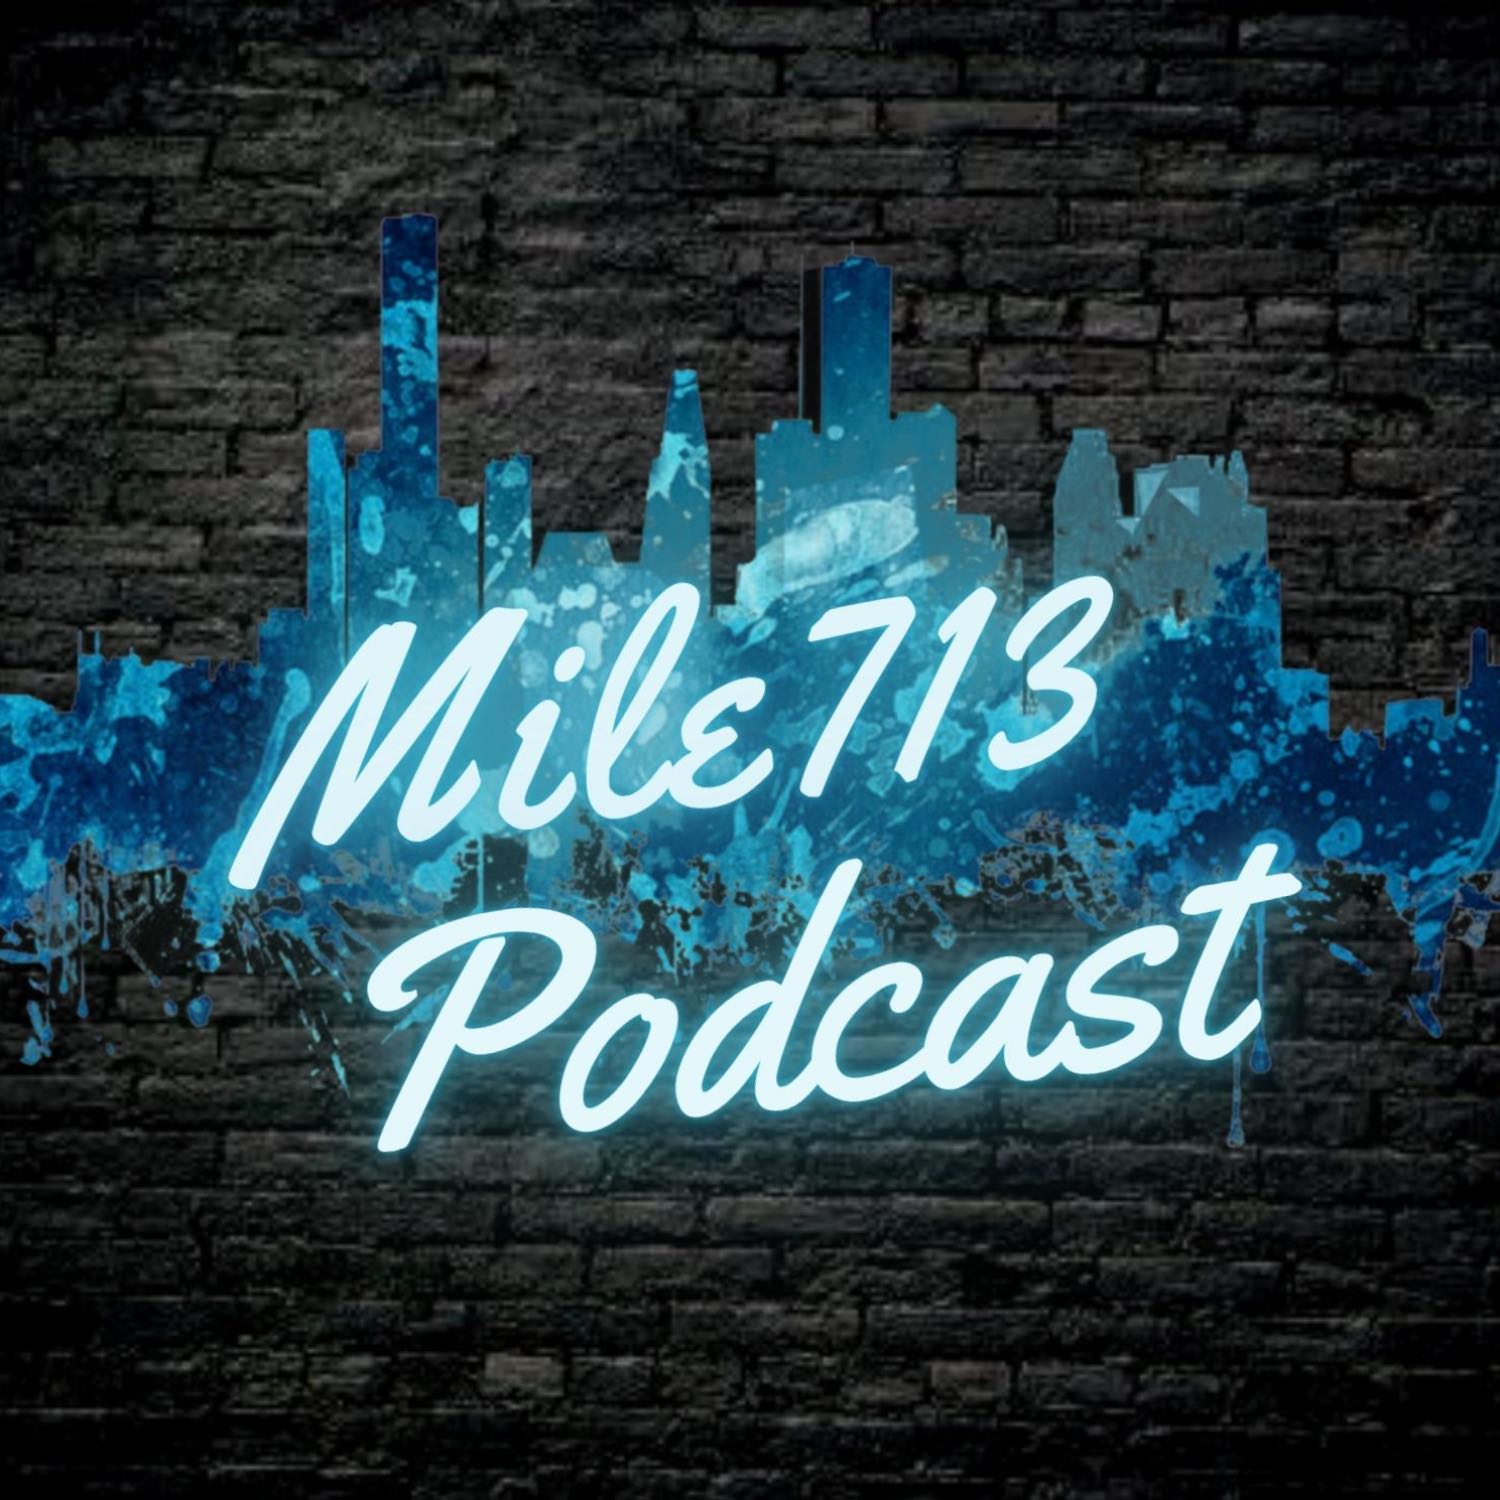 Mile 713 Podcast